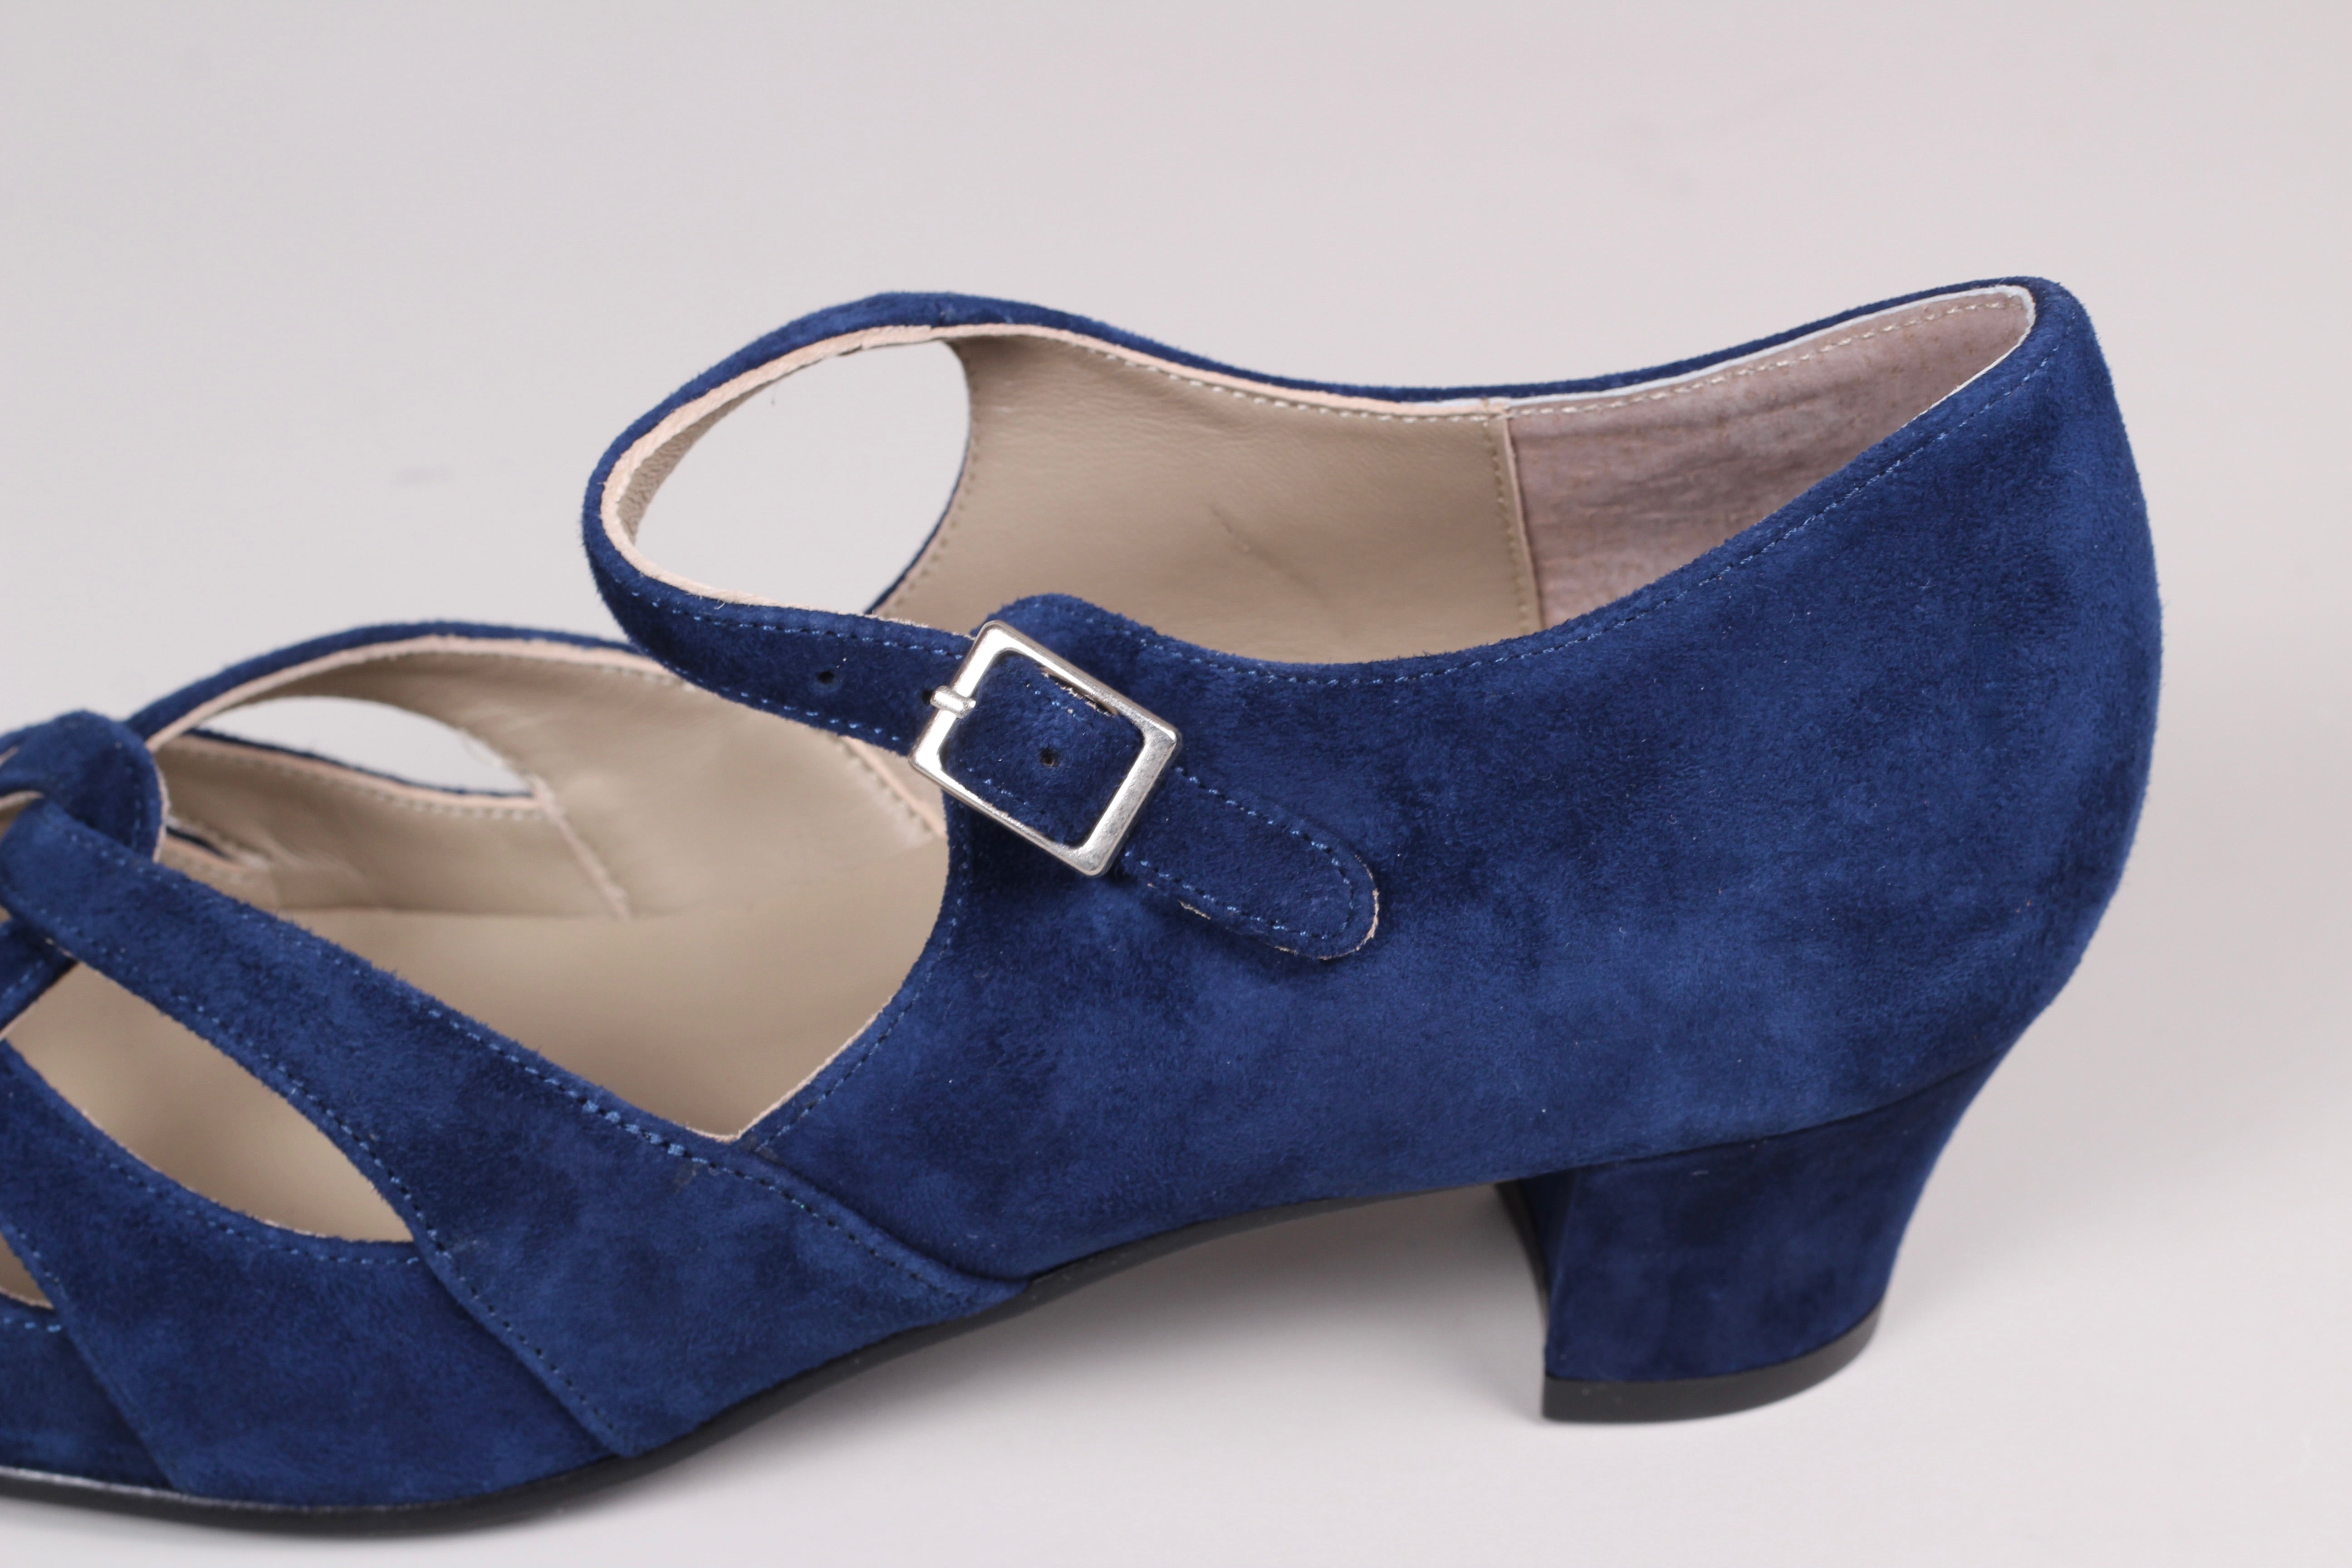 Everyday 1930s /1940s style suede sandals - Navy blue - Ida